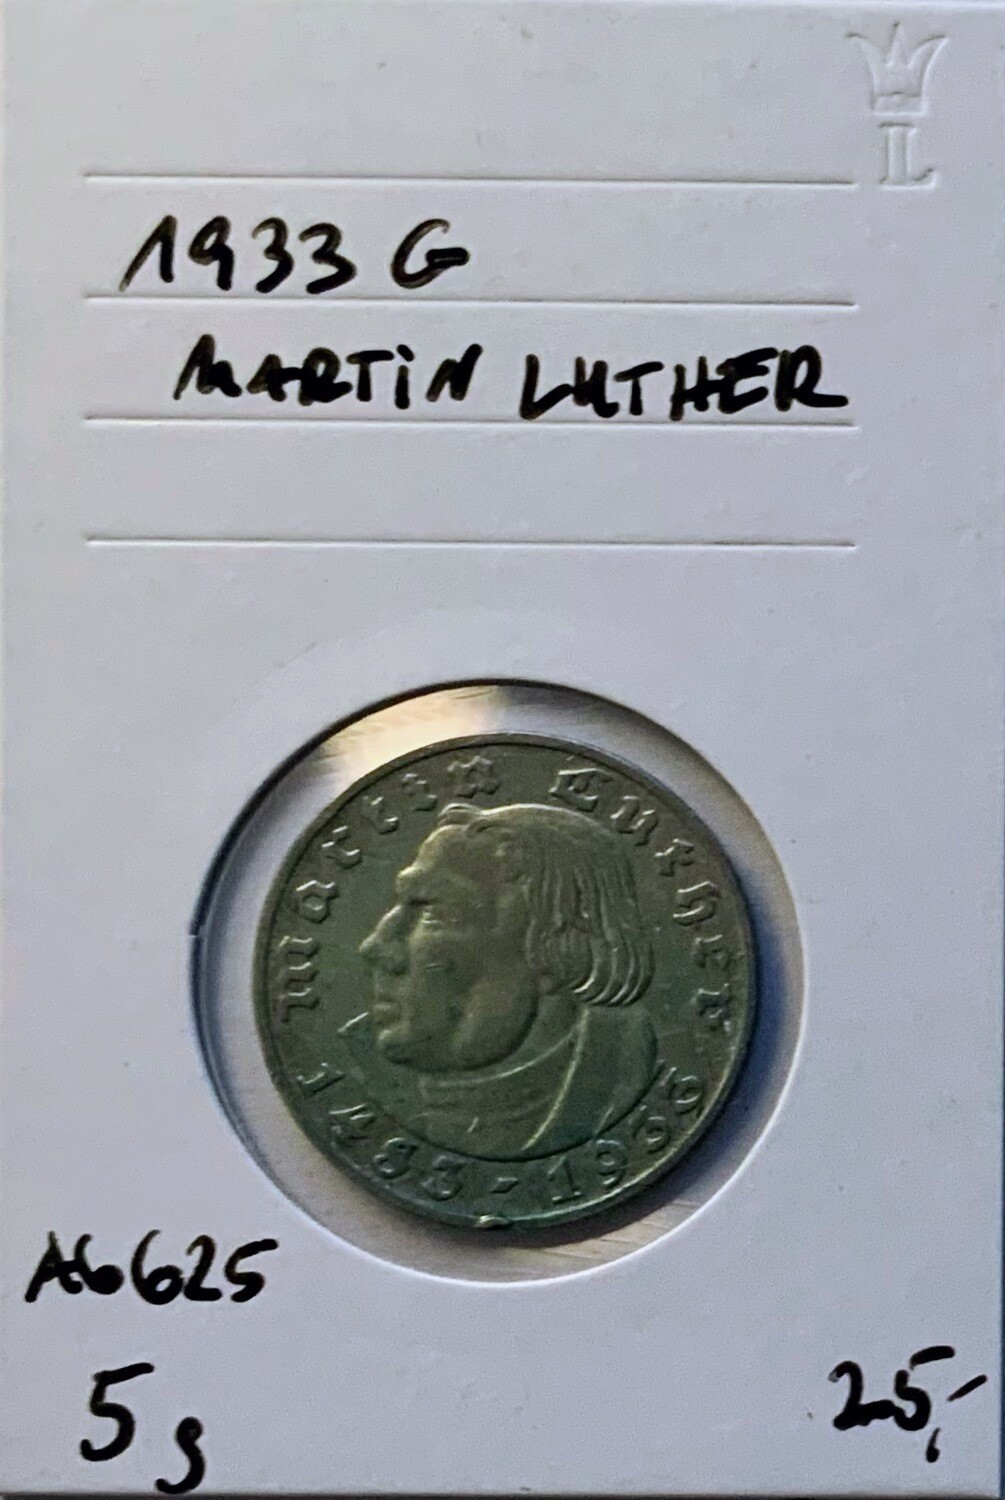 Martin Luther 2 RM 1933 G